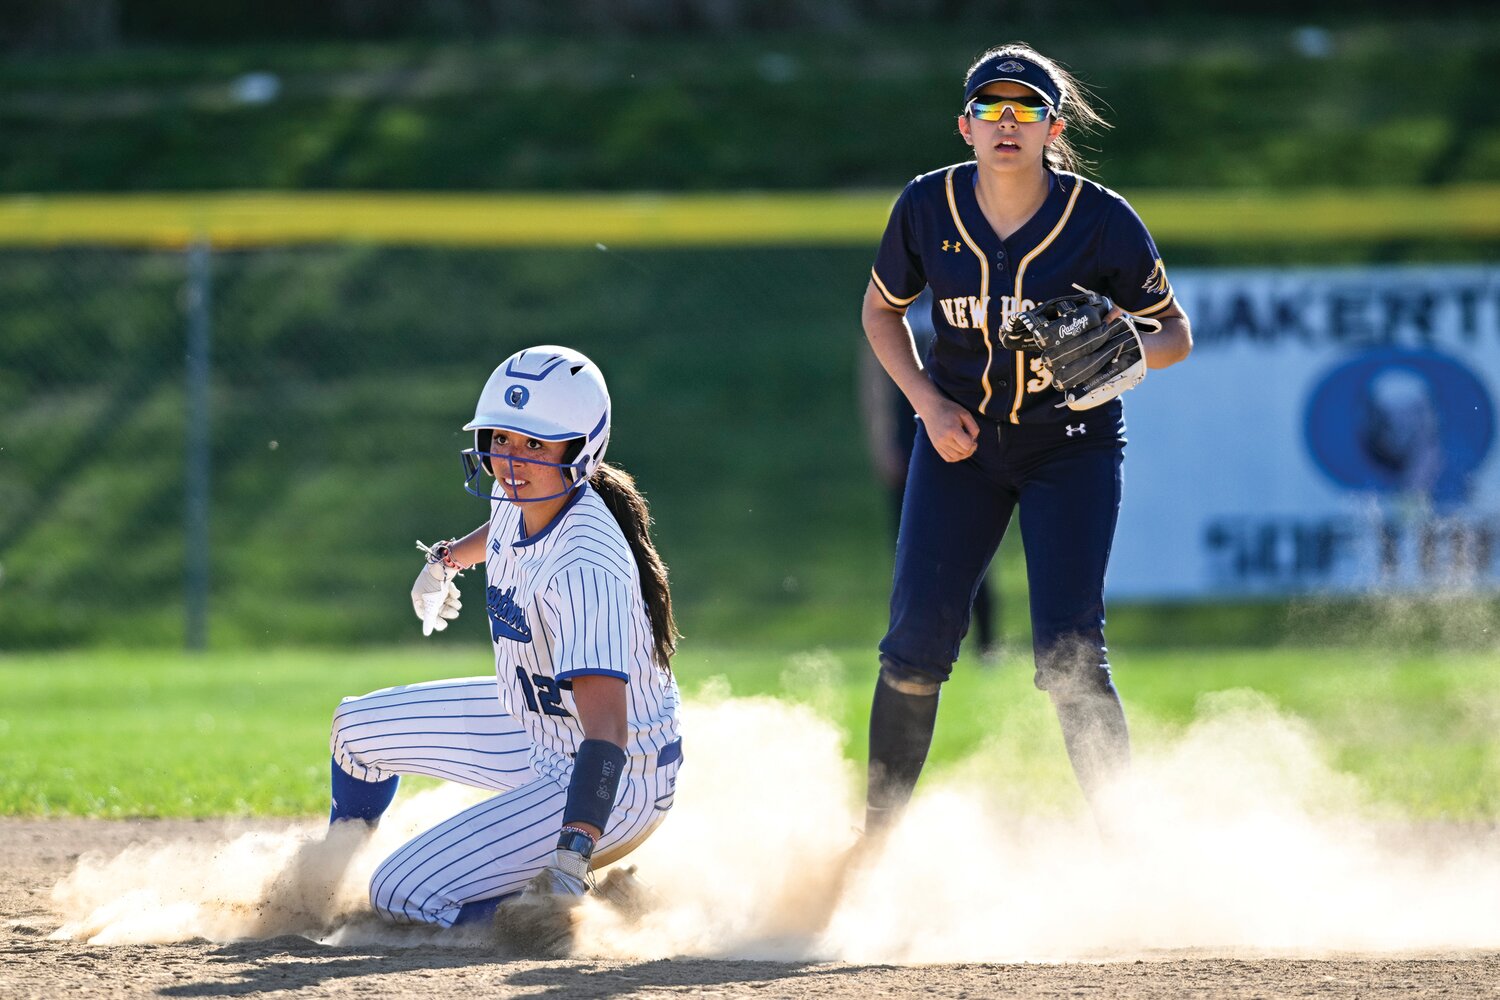 Cadence Lewis watches the throw as she steals second base in the bottom of the sixth inning.